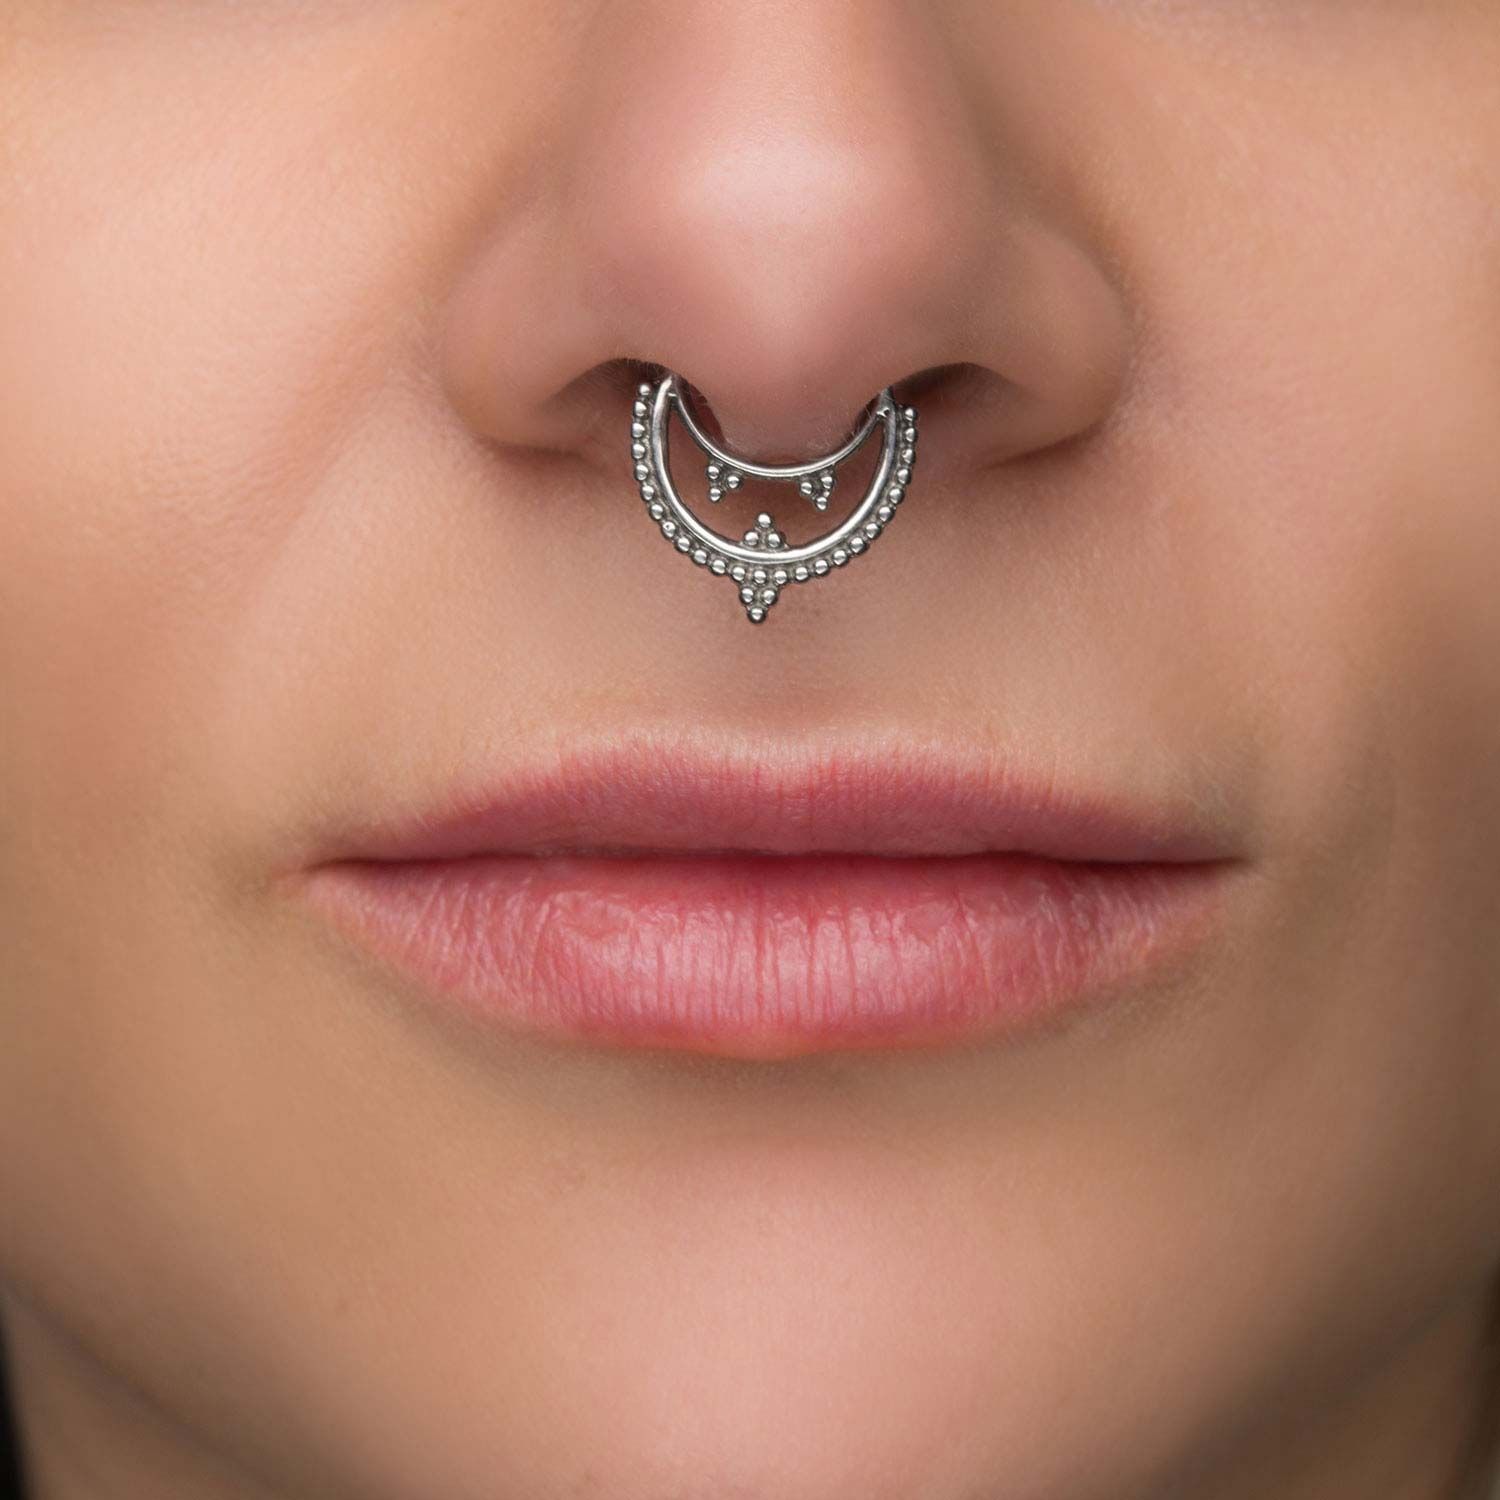 saddle nose from septum piercing